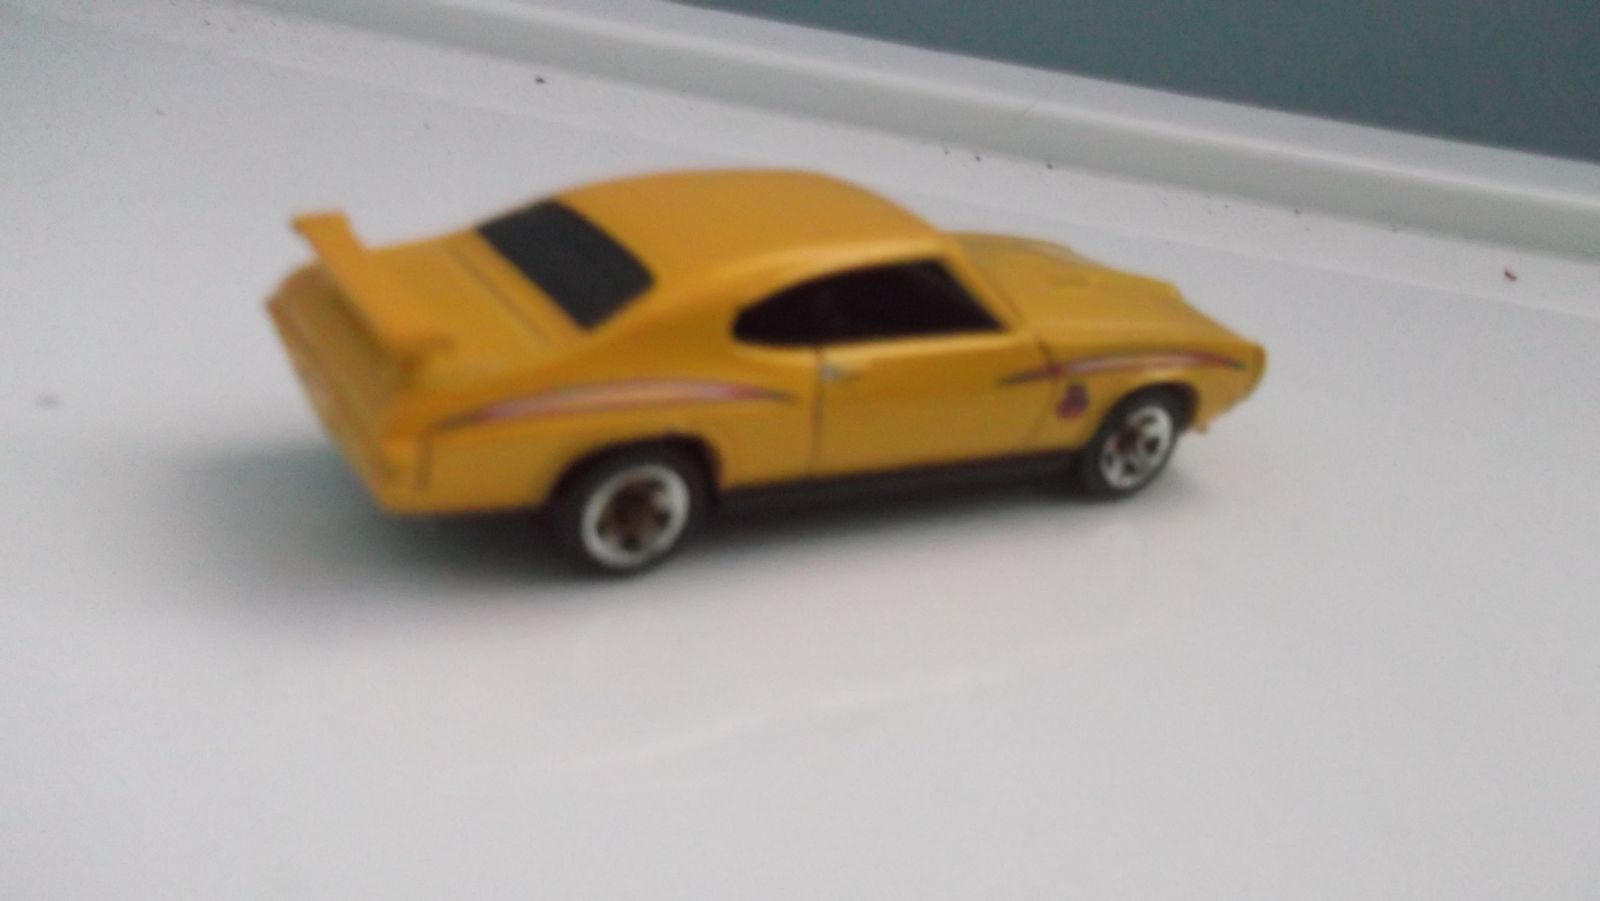 Illustration for article titled Yard Sale Free Find - 70 Pontiac GTO Judge (potential custom)